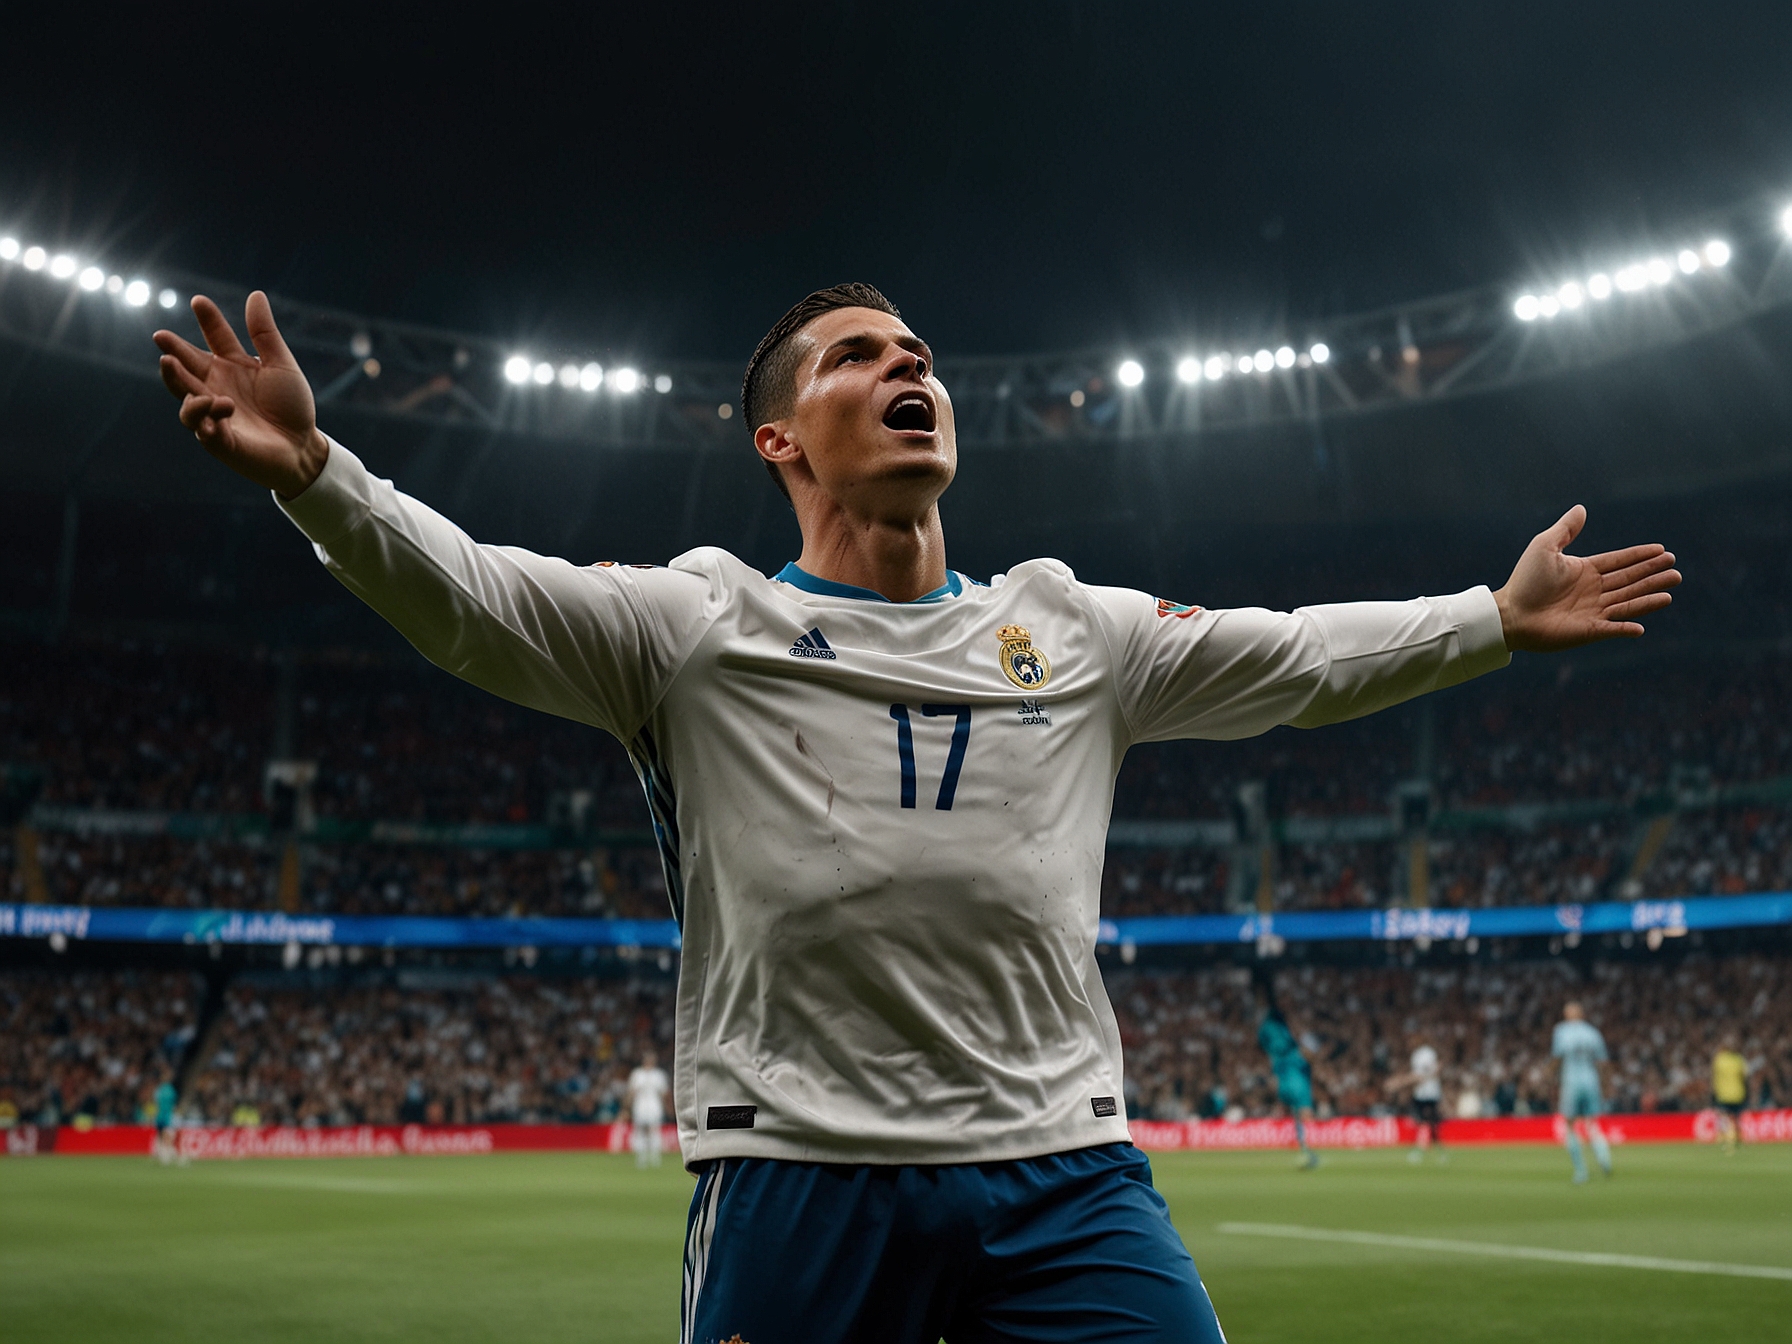 Cristiano Ronaldo performs his iconic goal celebration with a jump, twist, and outstretched arms, signifying dominance and confidence at Euro 2024, analyzed by body language experts.